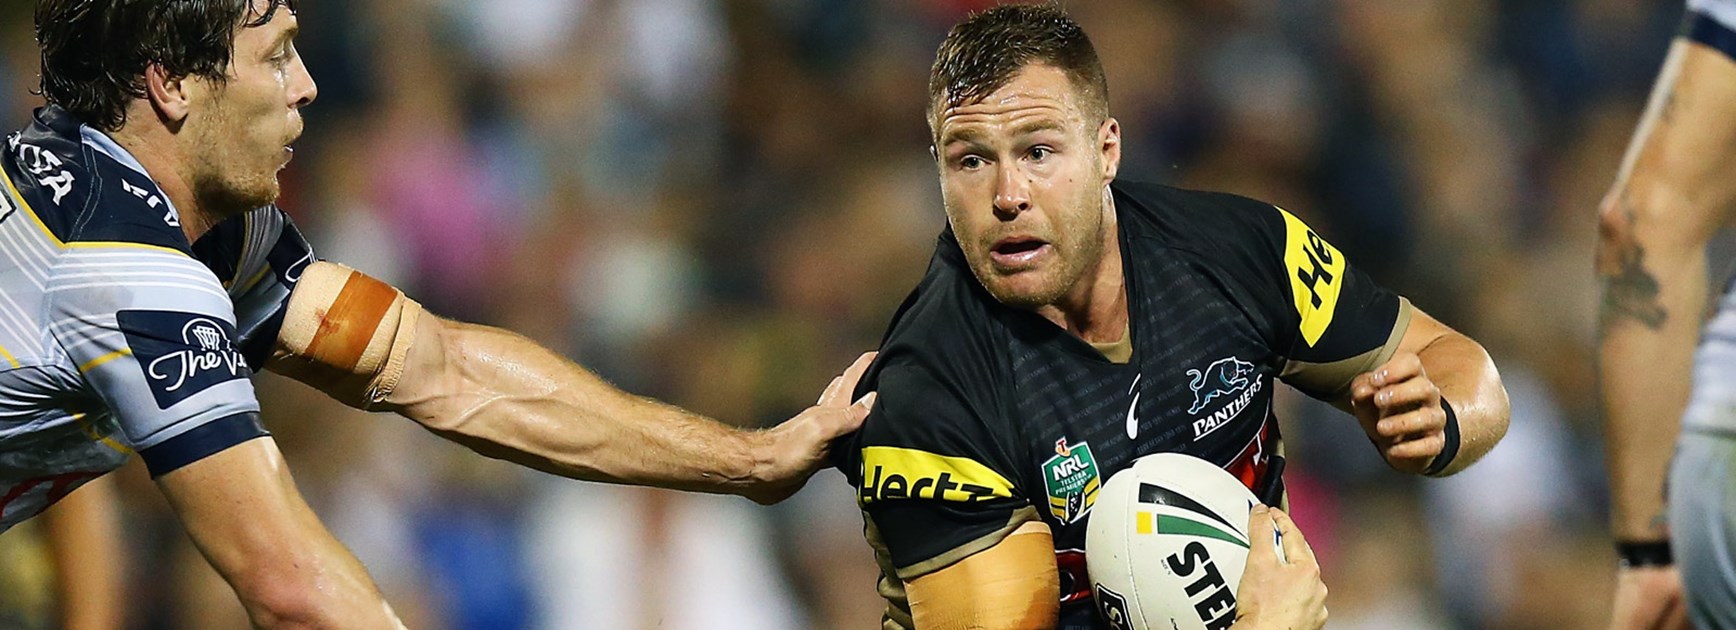 Trent Merrin scored a try against the Cowboys in Round 6.